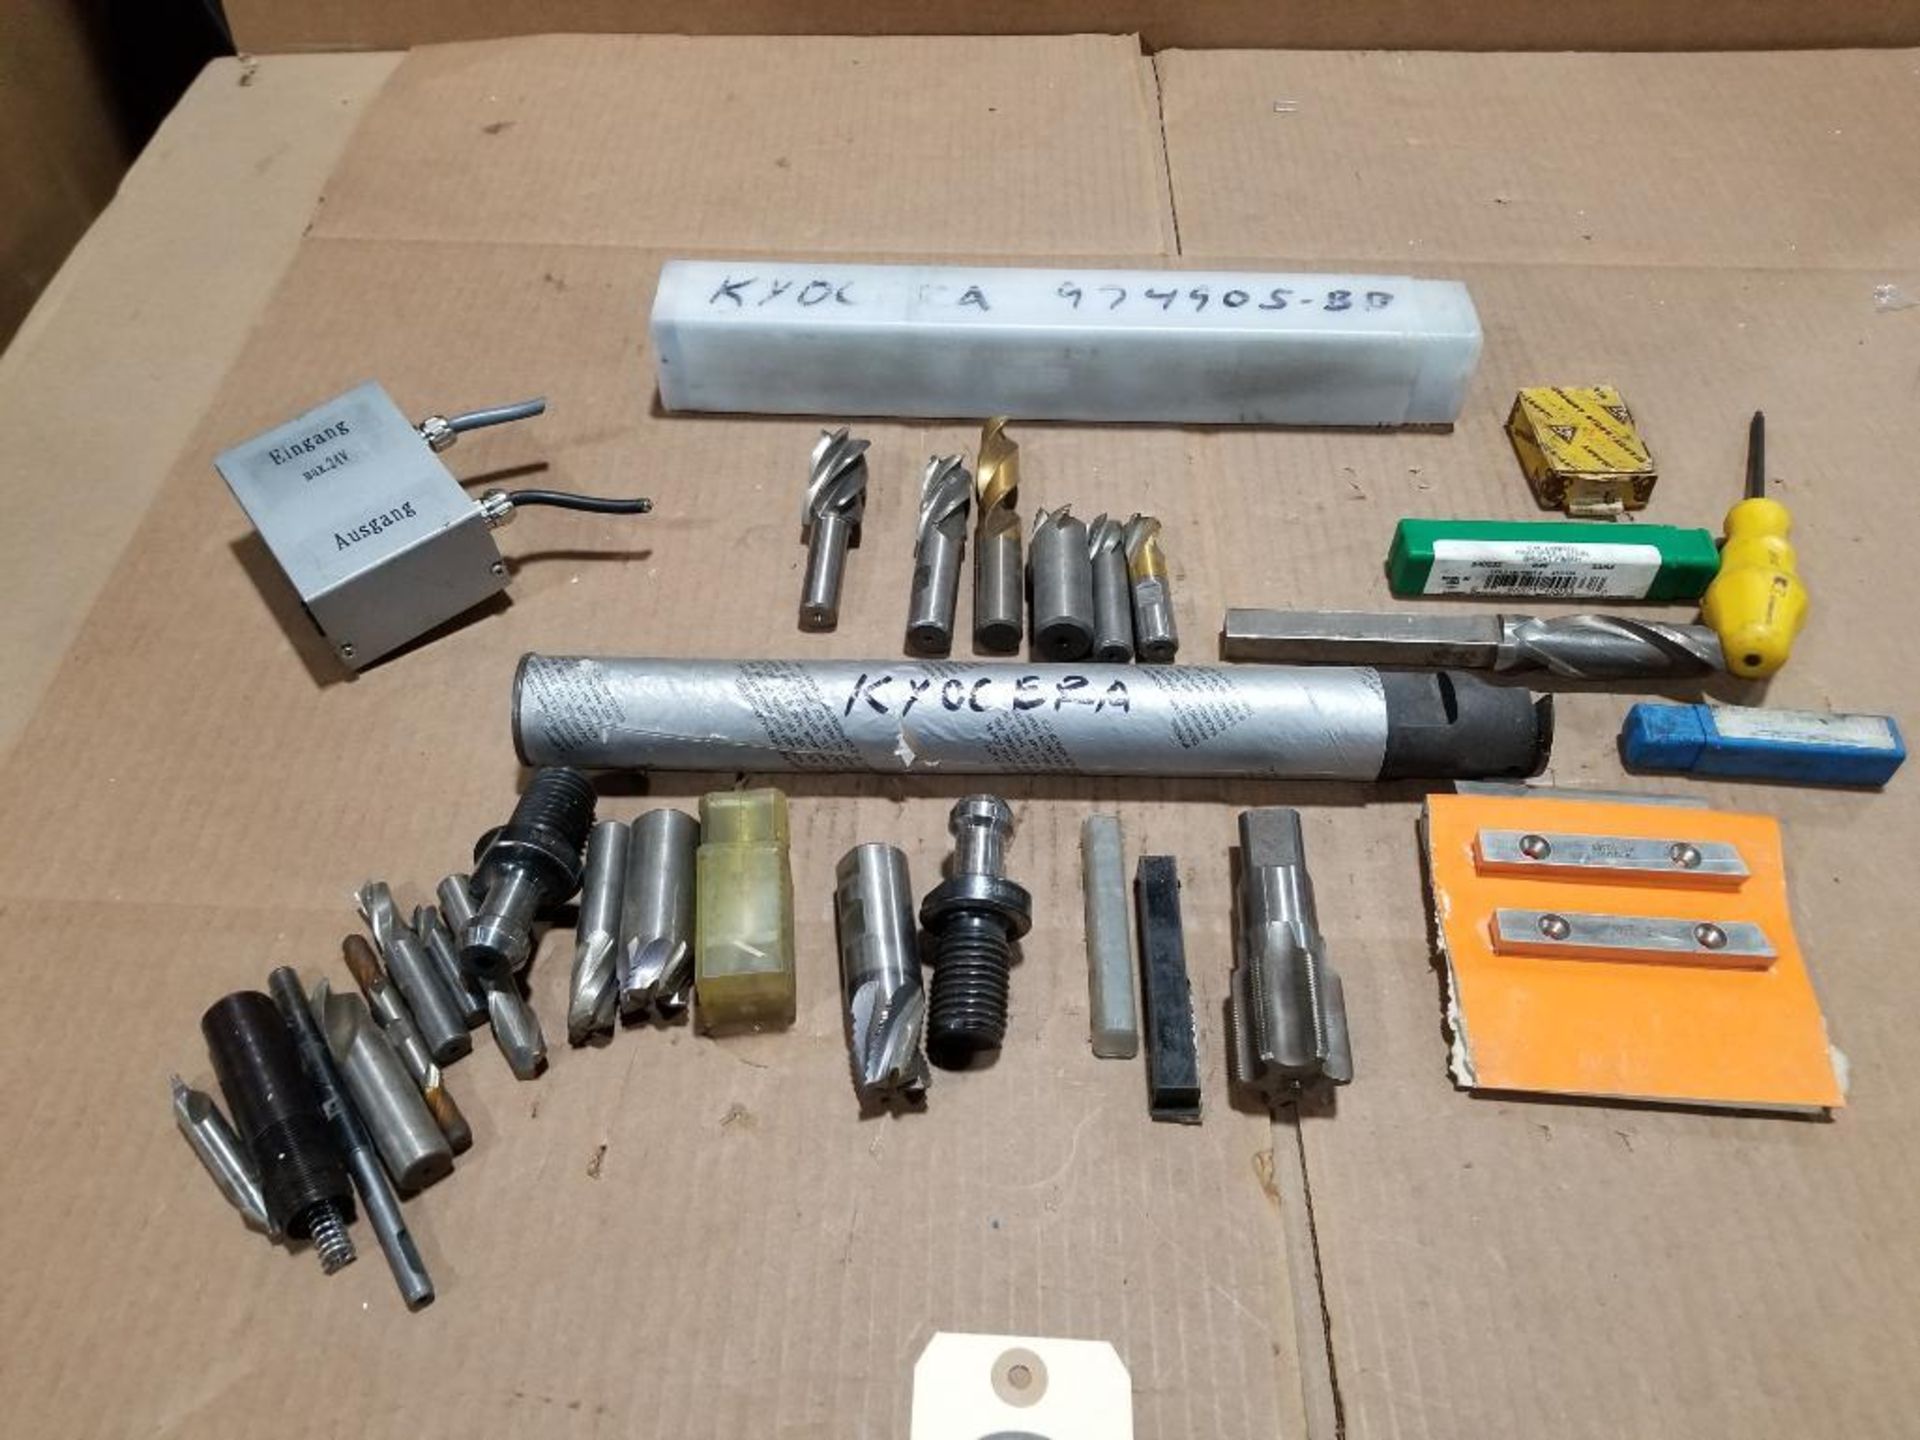 Assorted tooling and consumables.